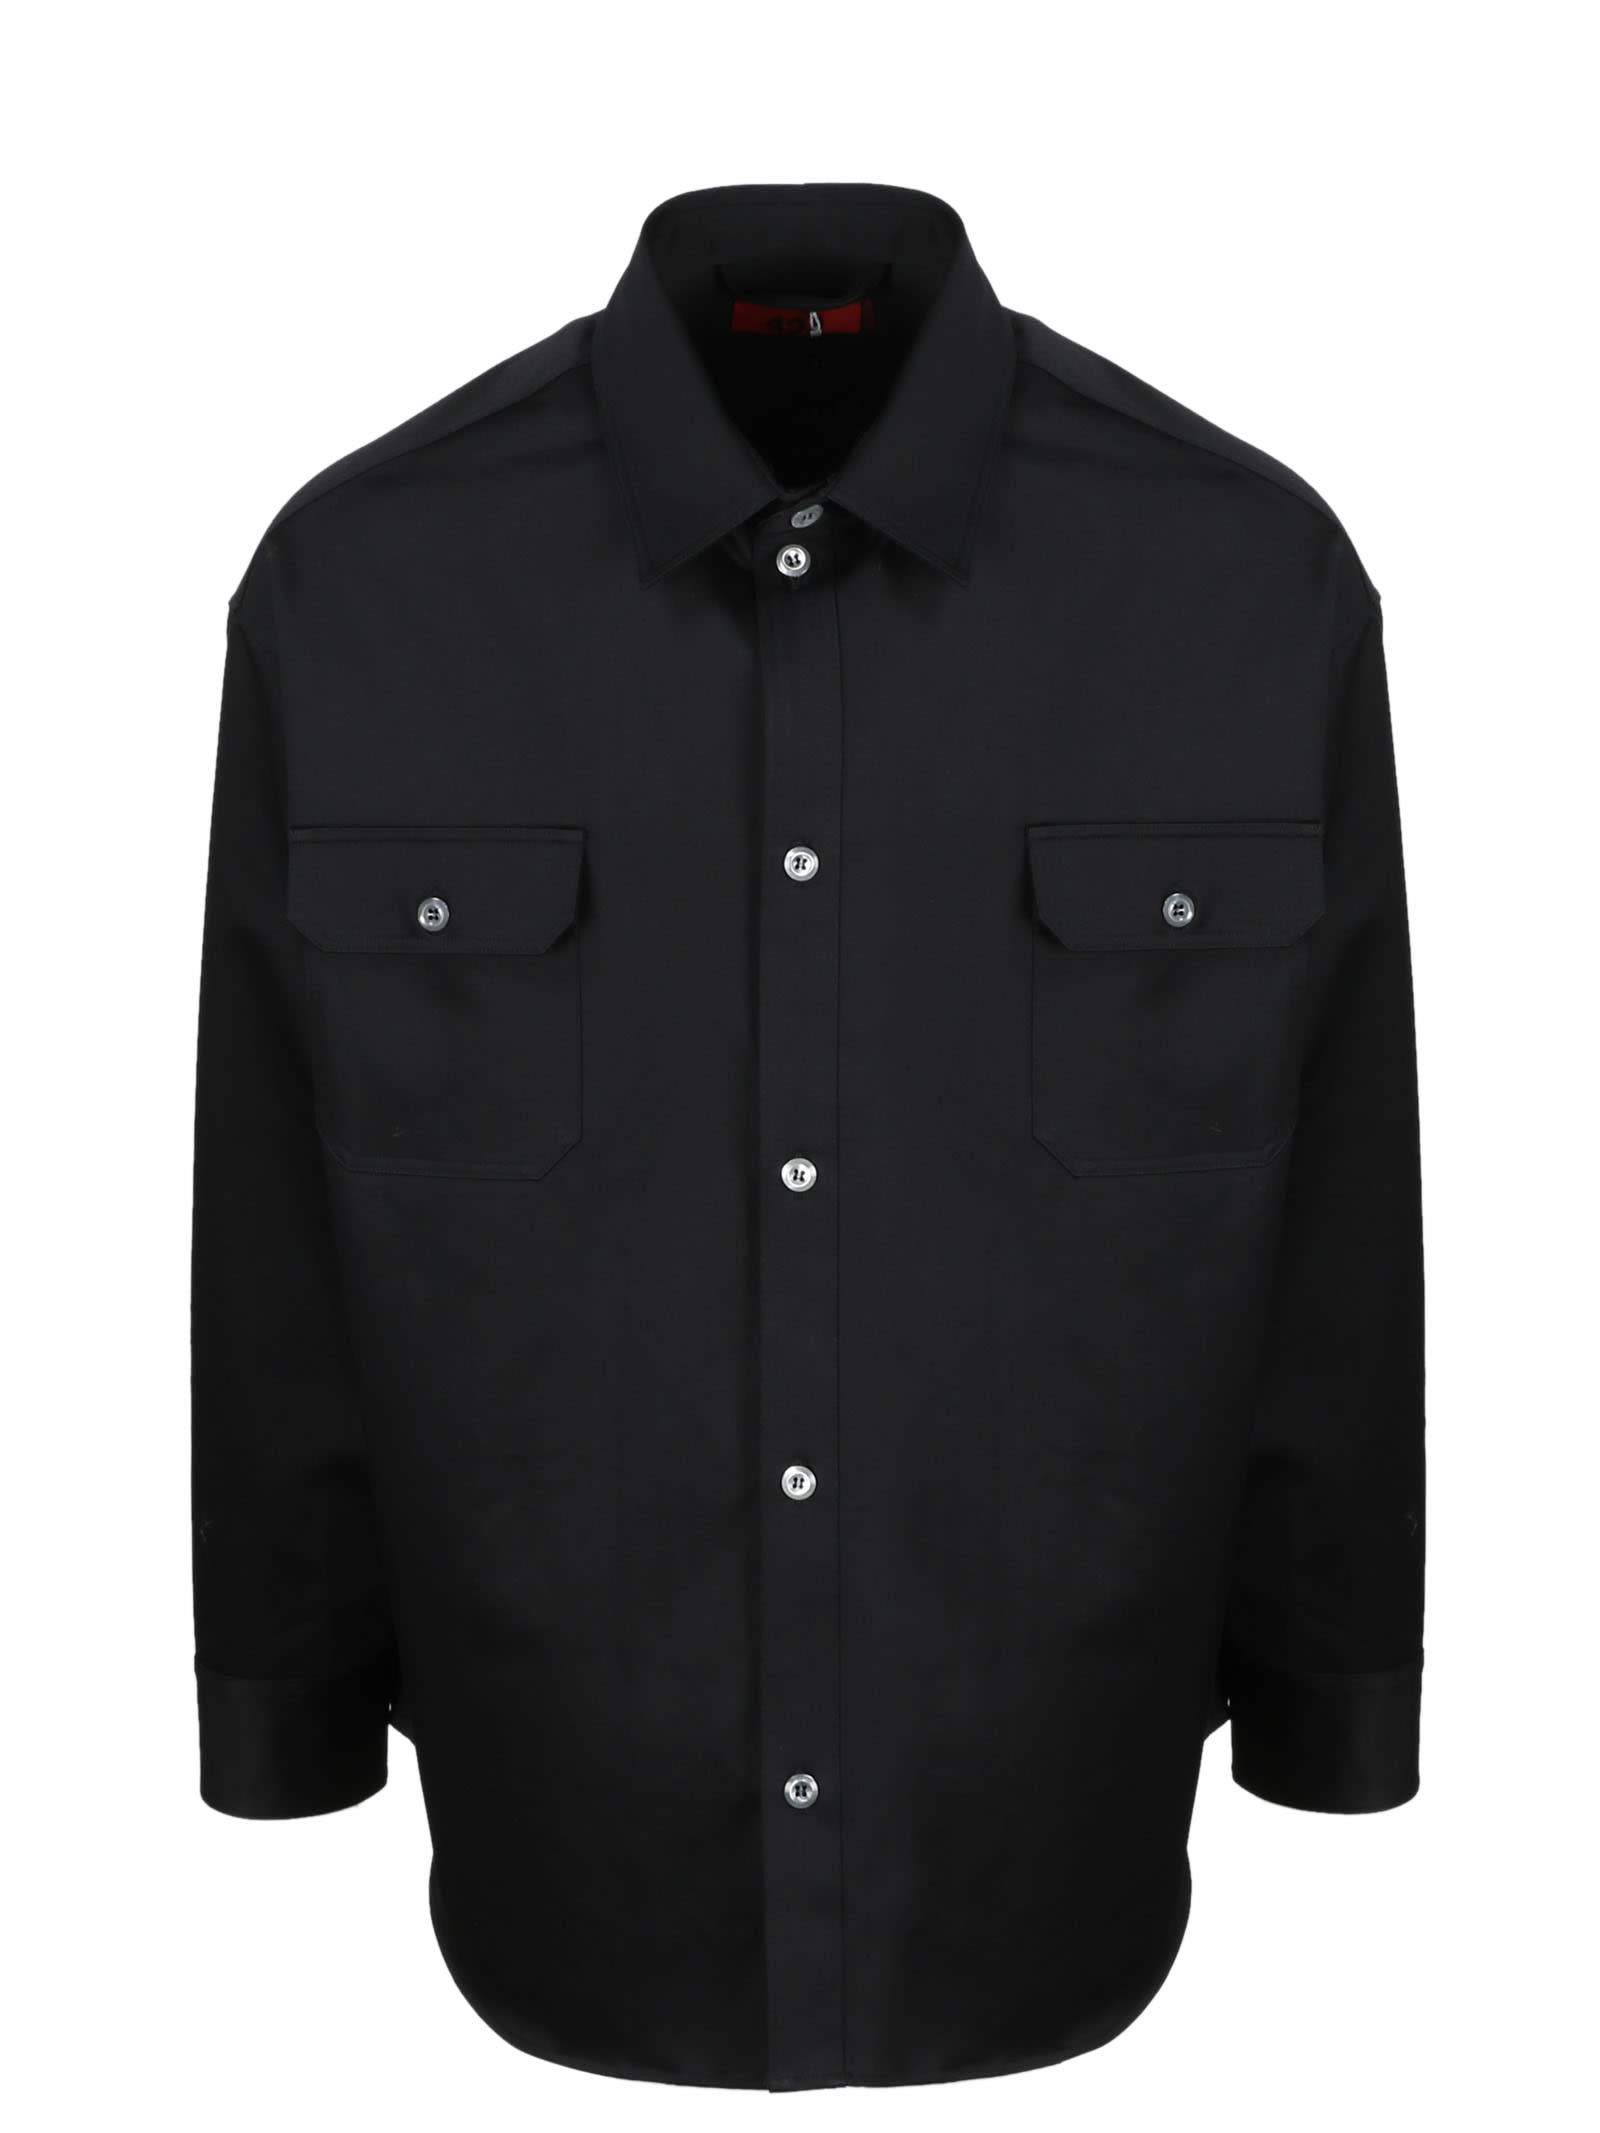 FourTwoFour on Fairfax Song For The Mute Overshirt